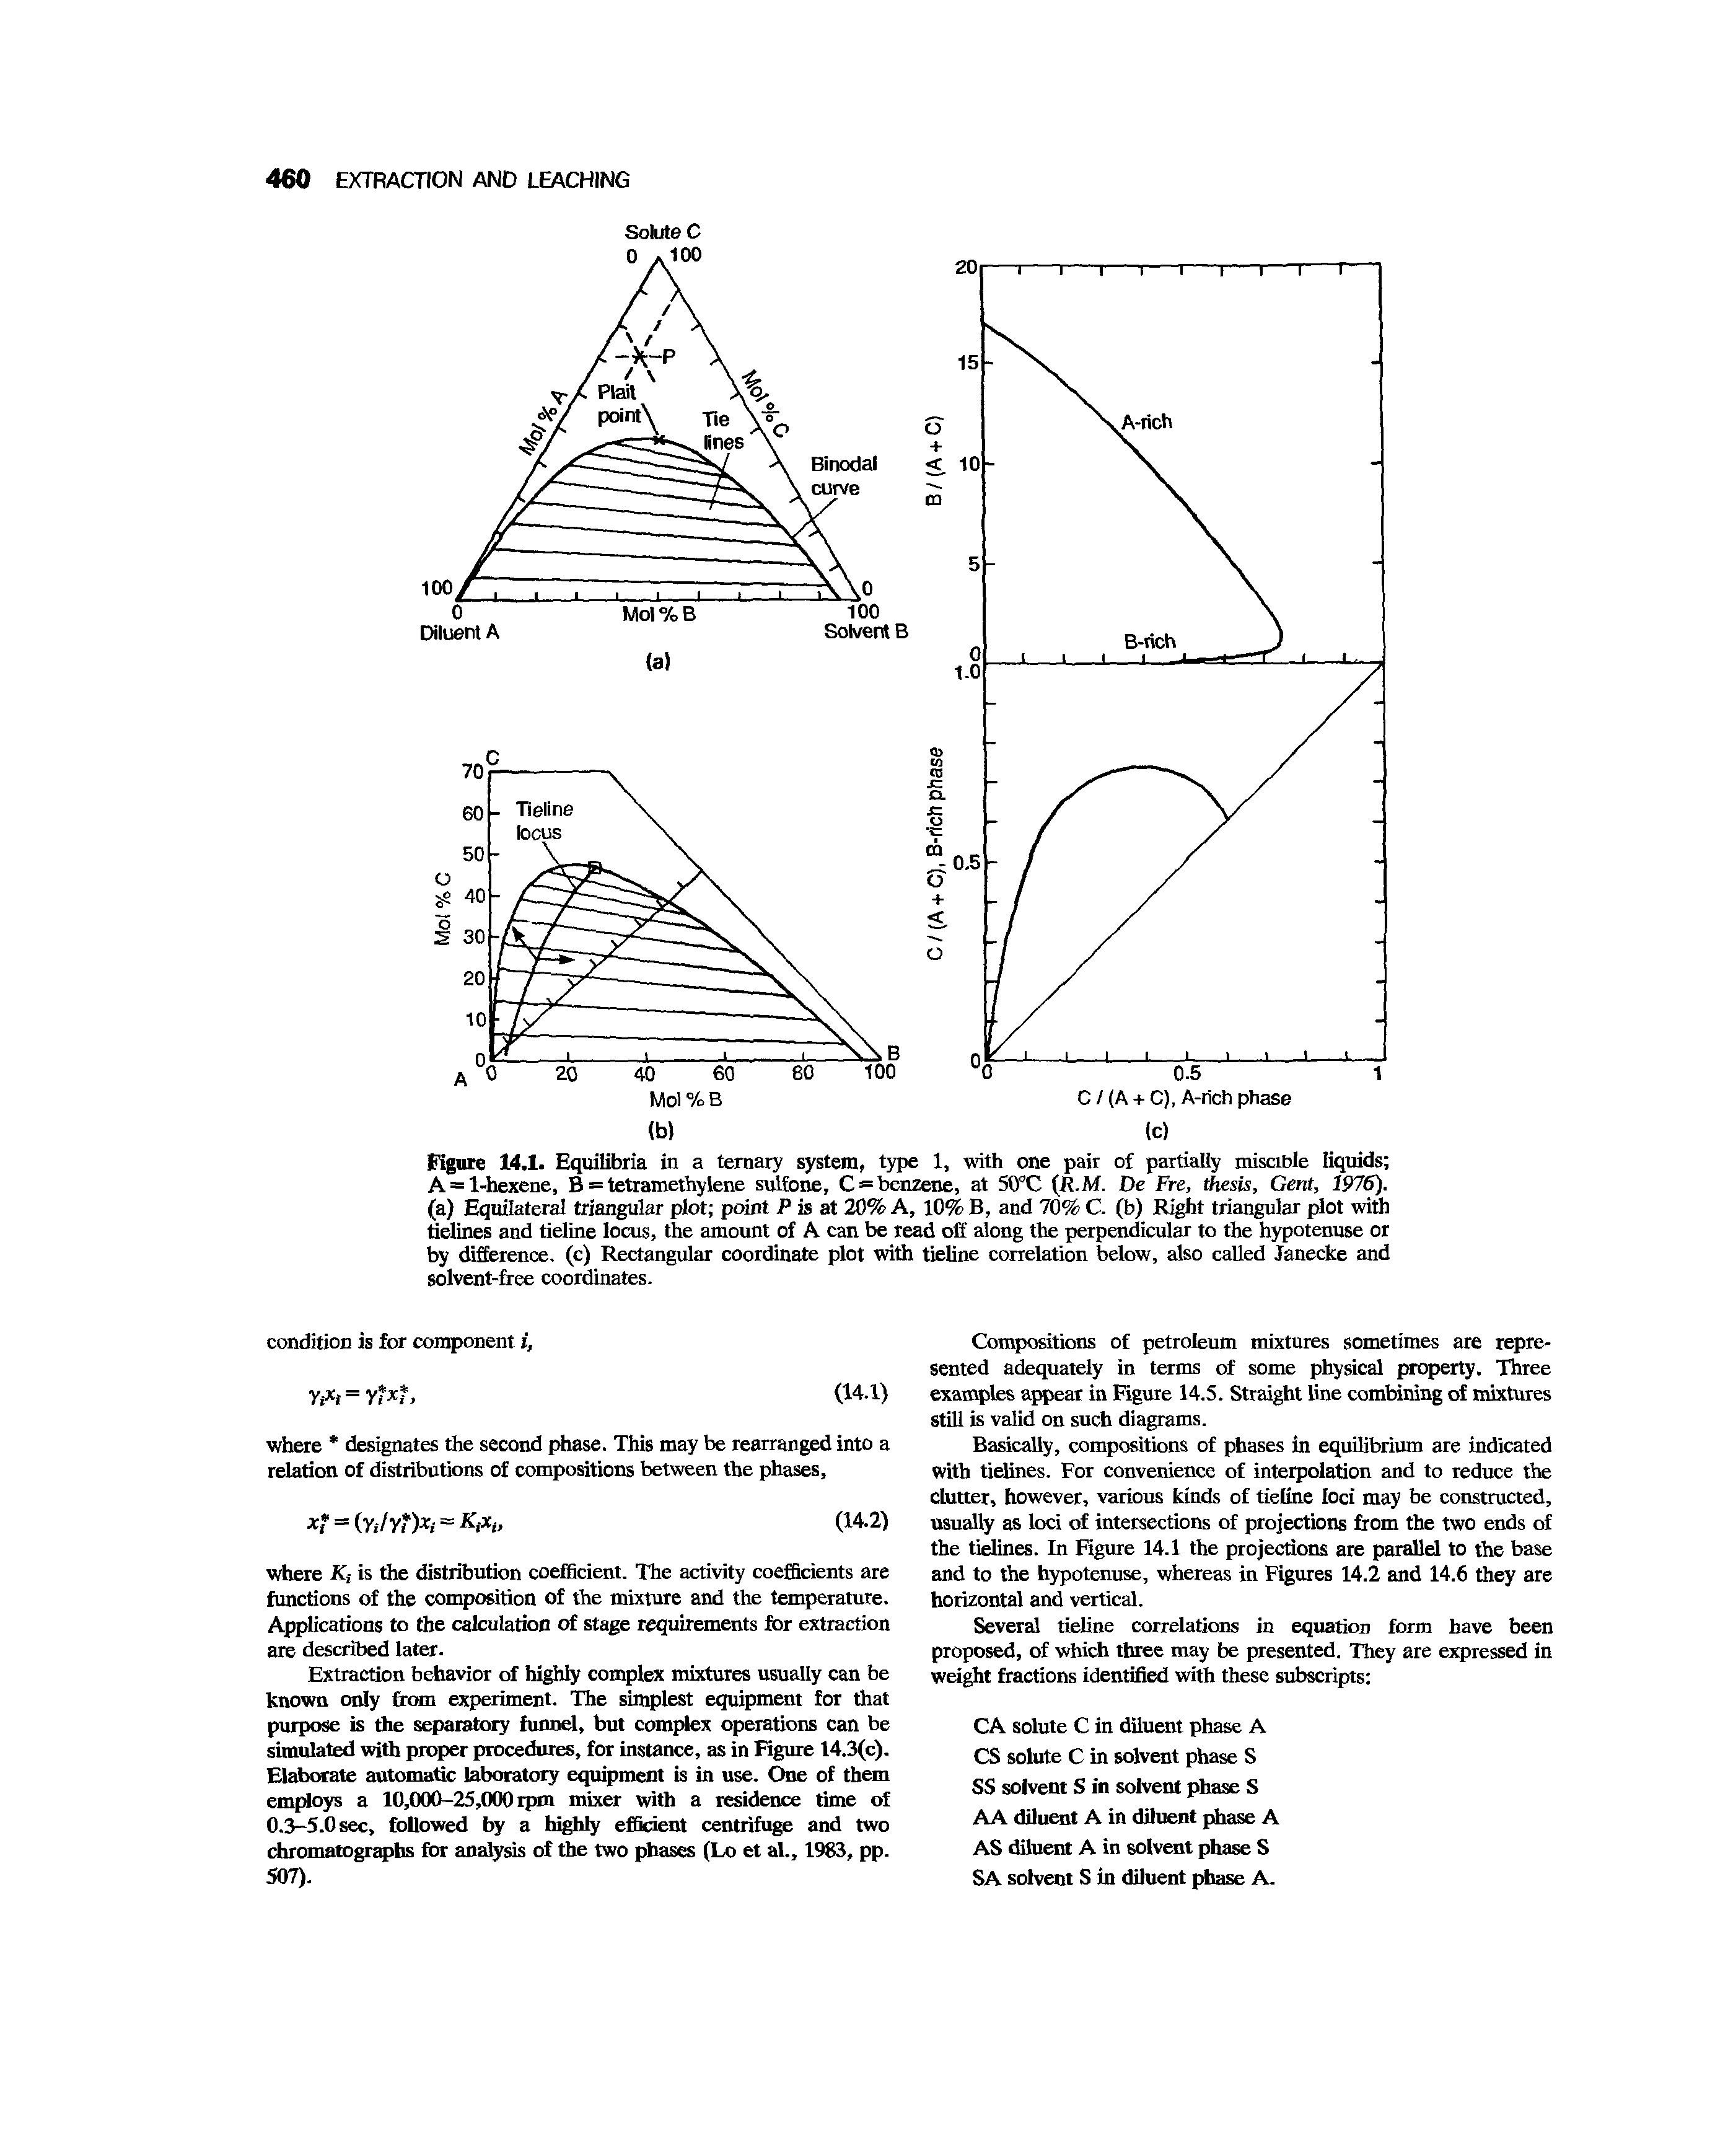 Figure 14.1. Equilibria in a ternary system, type 1, with one pair of partially miscible liquids A = 1-hexene, B = tetramethylene sulfbne, C = benzene, at 5(TC (JR.M. De Fre, thesis, Gent, 1976). (a) Equilateral triangular plot point P is at 20% A, 10% B, and 70% C. (b) Right triangular plot with delines and tieline locus, the amount of A can be read off along the perpendicular to the hypotenuse or by difference, (c) Rectangular coordinate plot with tieline correlation below, also called Janecke and solvent-free coordinates.